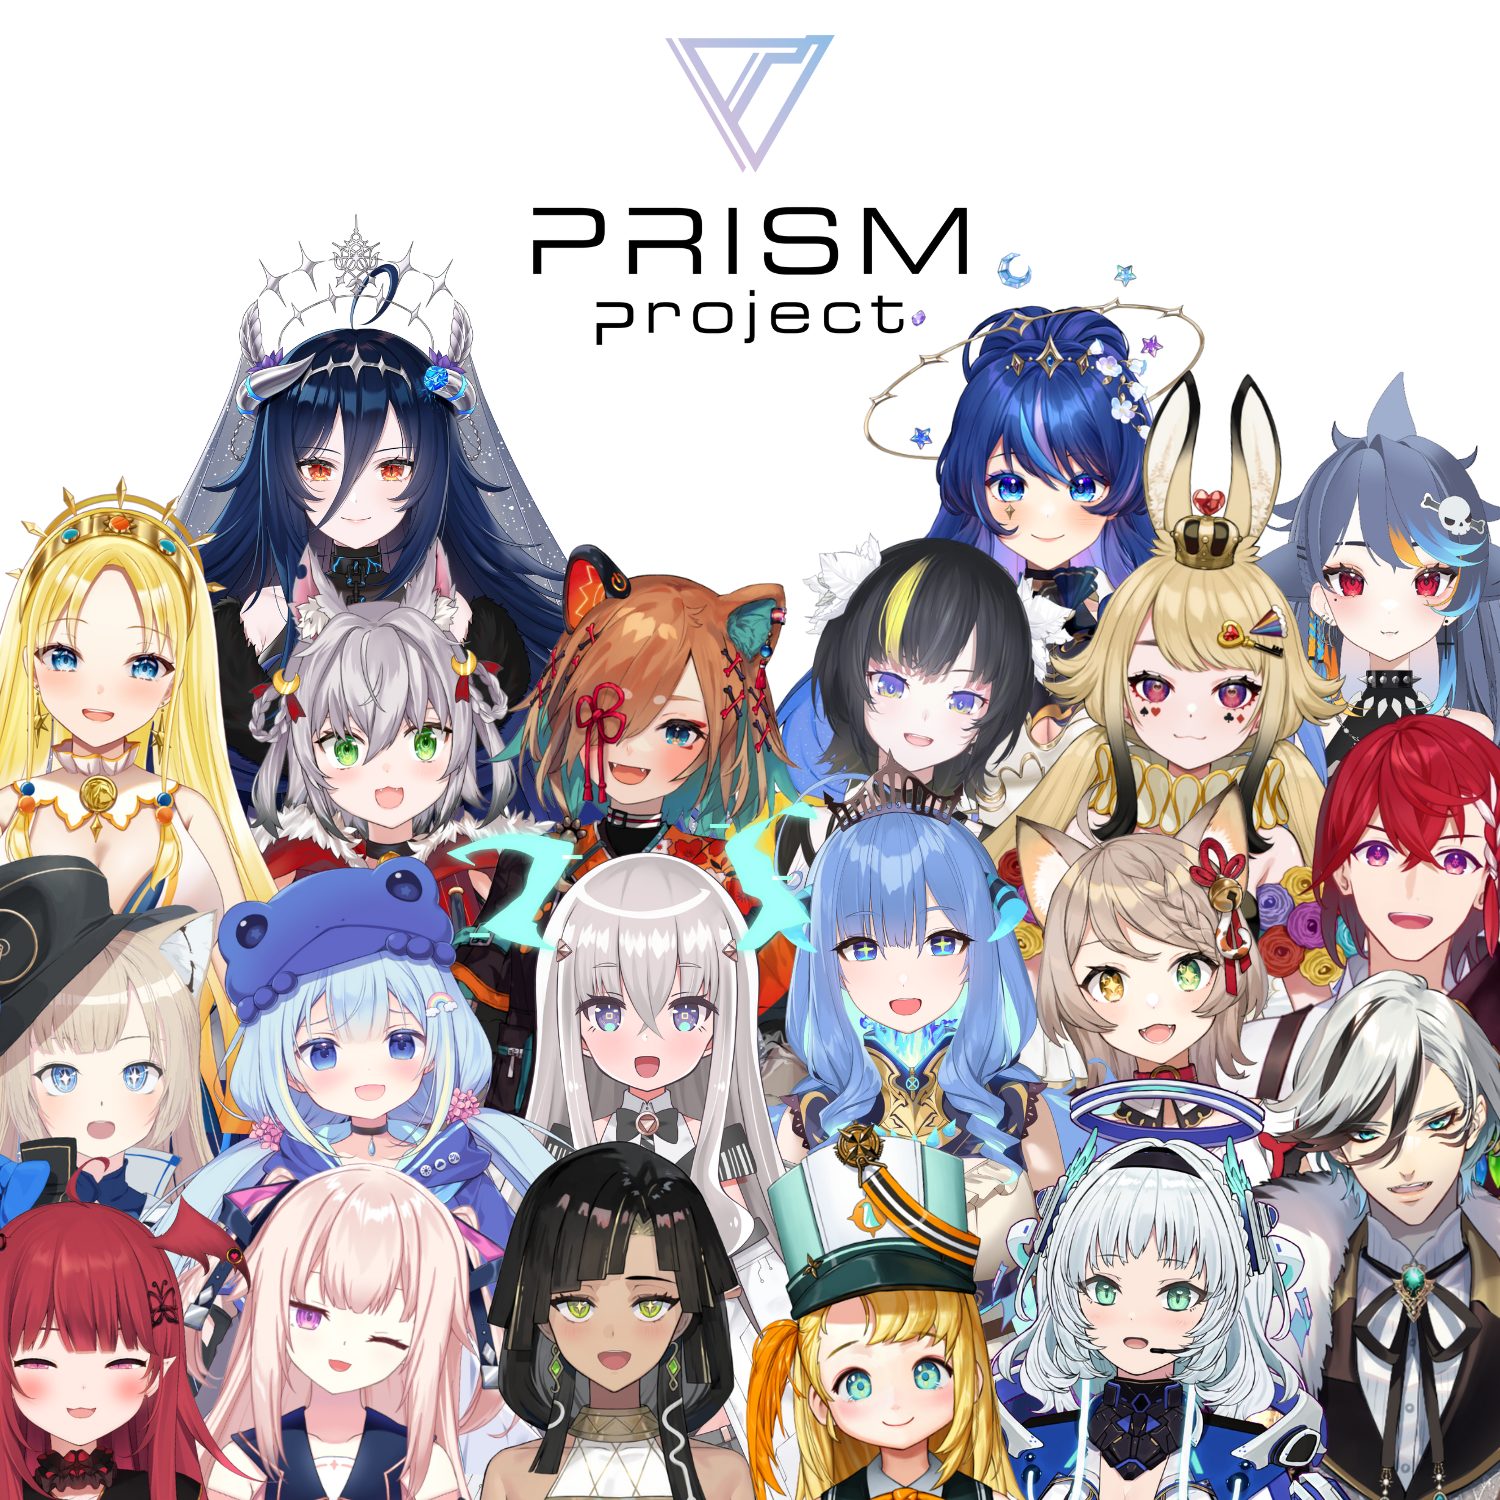 PRISM-Project Virtual Youtuber Group PRISM Project Releases Anthem Song Under Sony Music. Composition by Teddyloid!